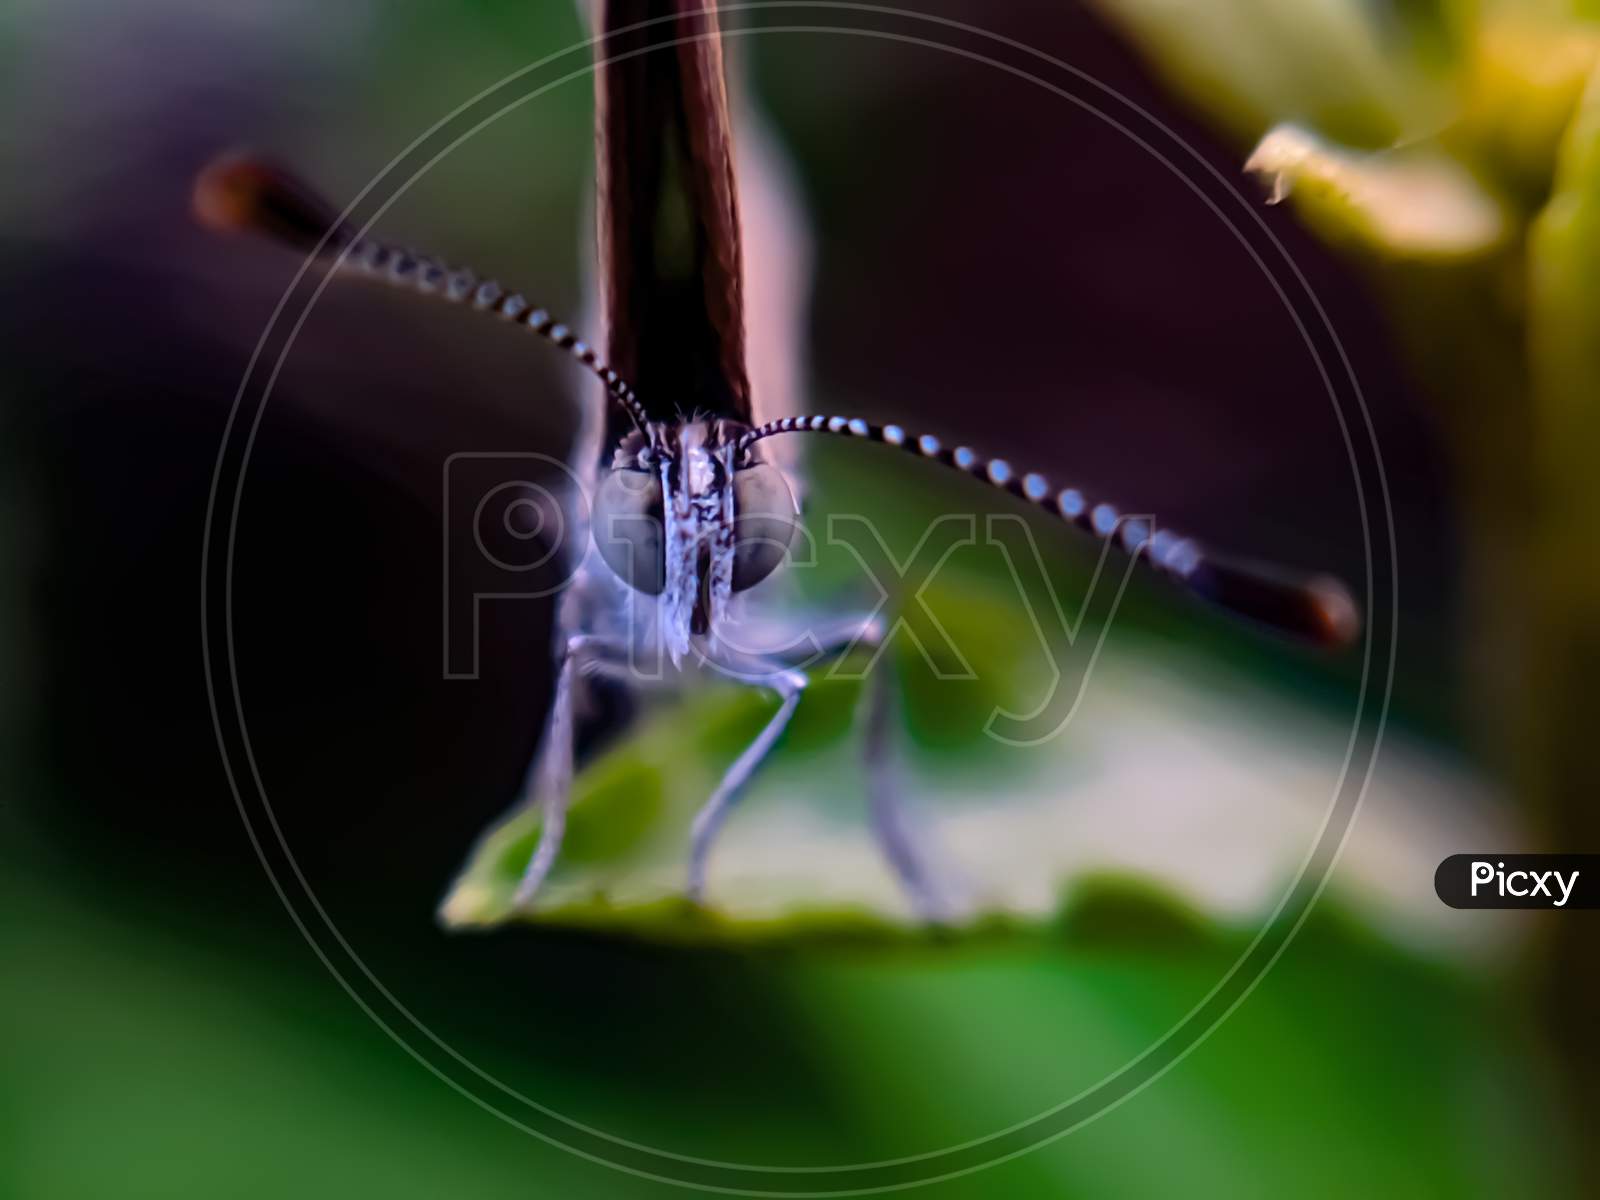 Zizula hylax species butterfly on leaf Tiny grass blue insect garden butterfly